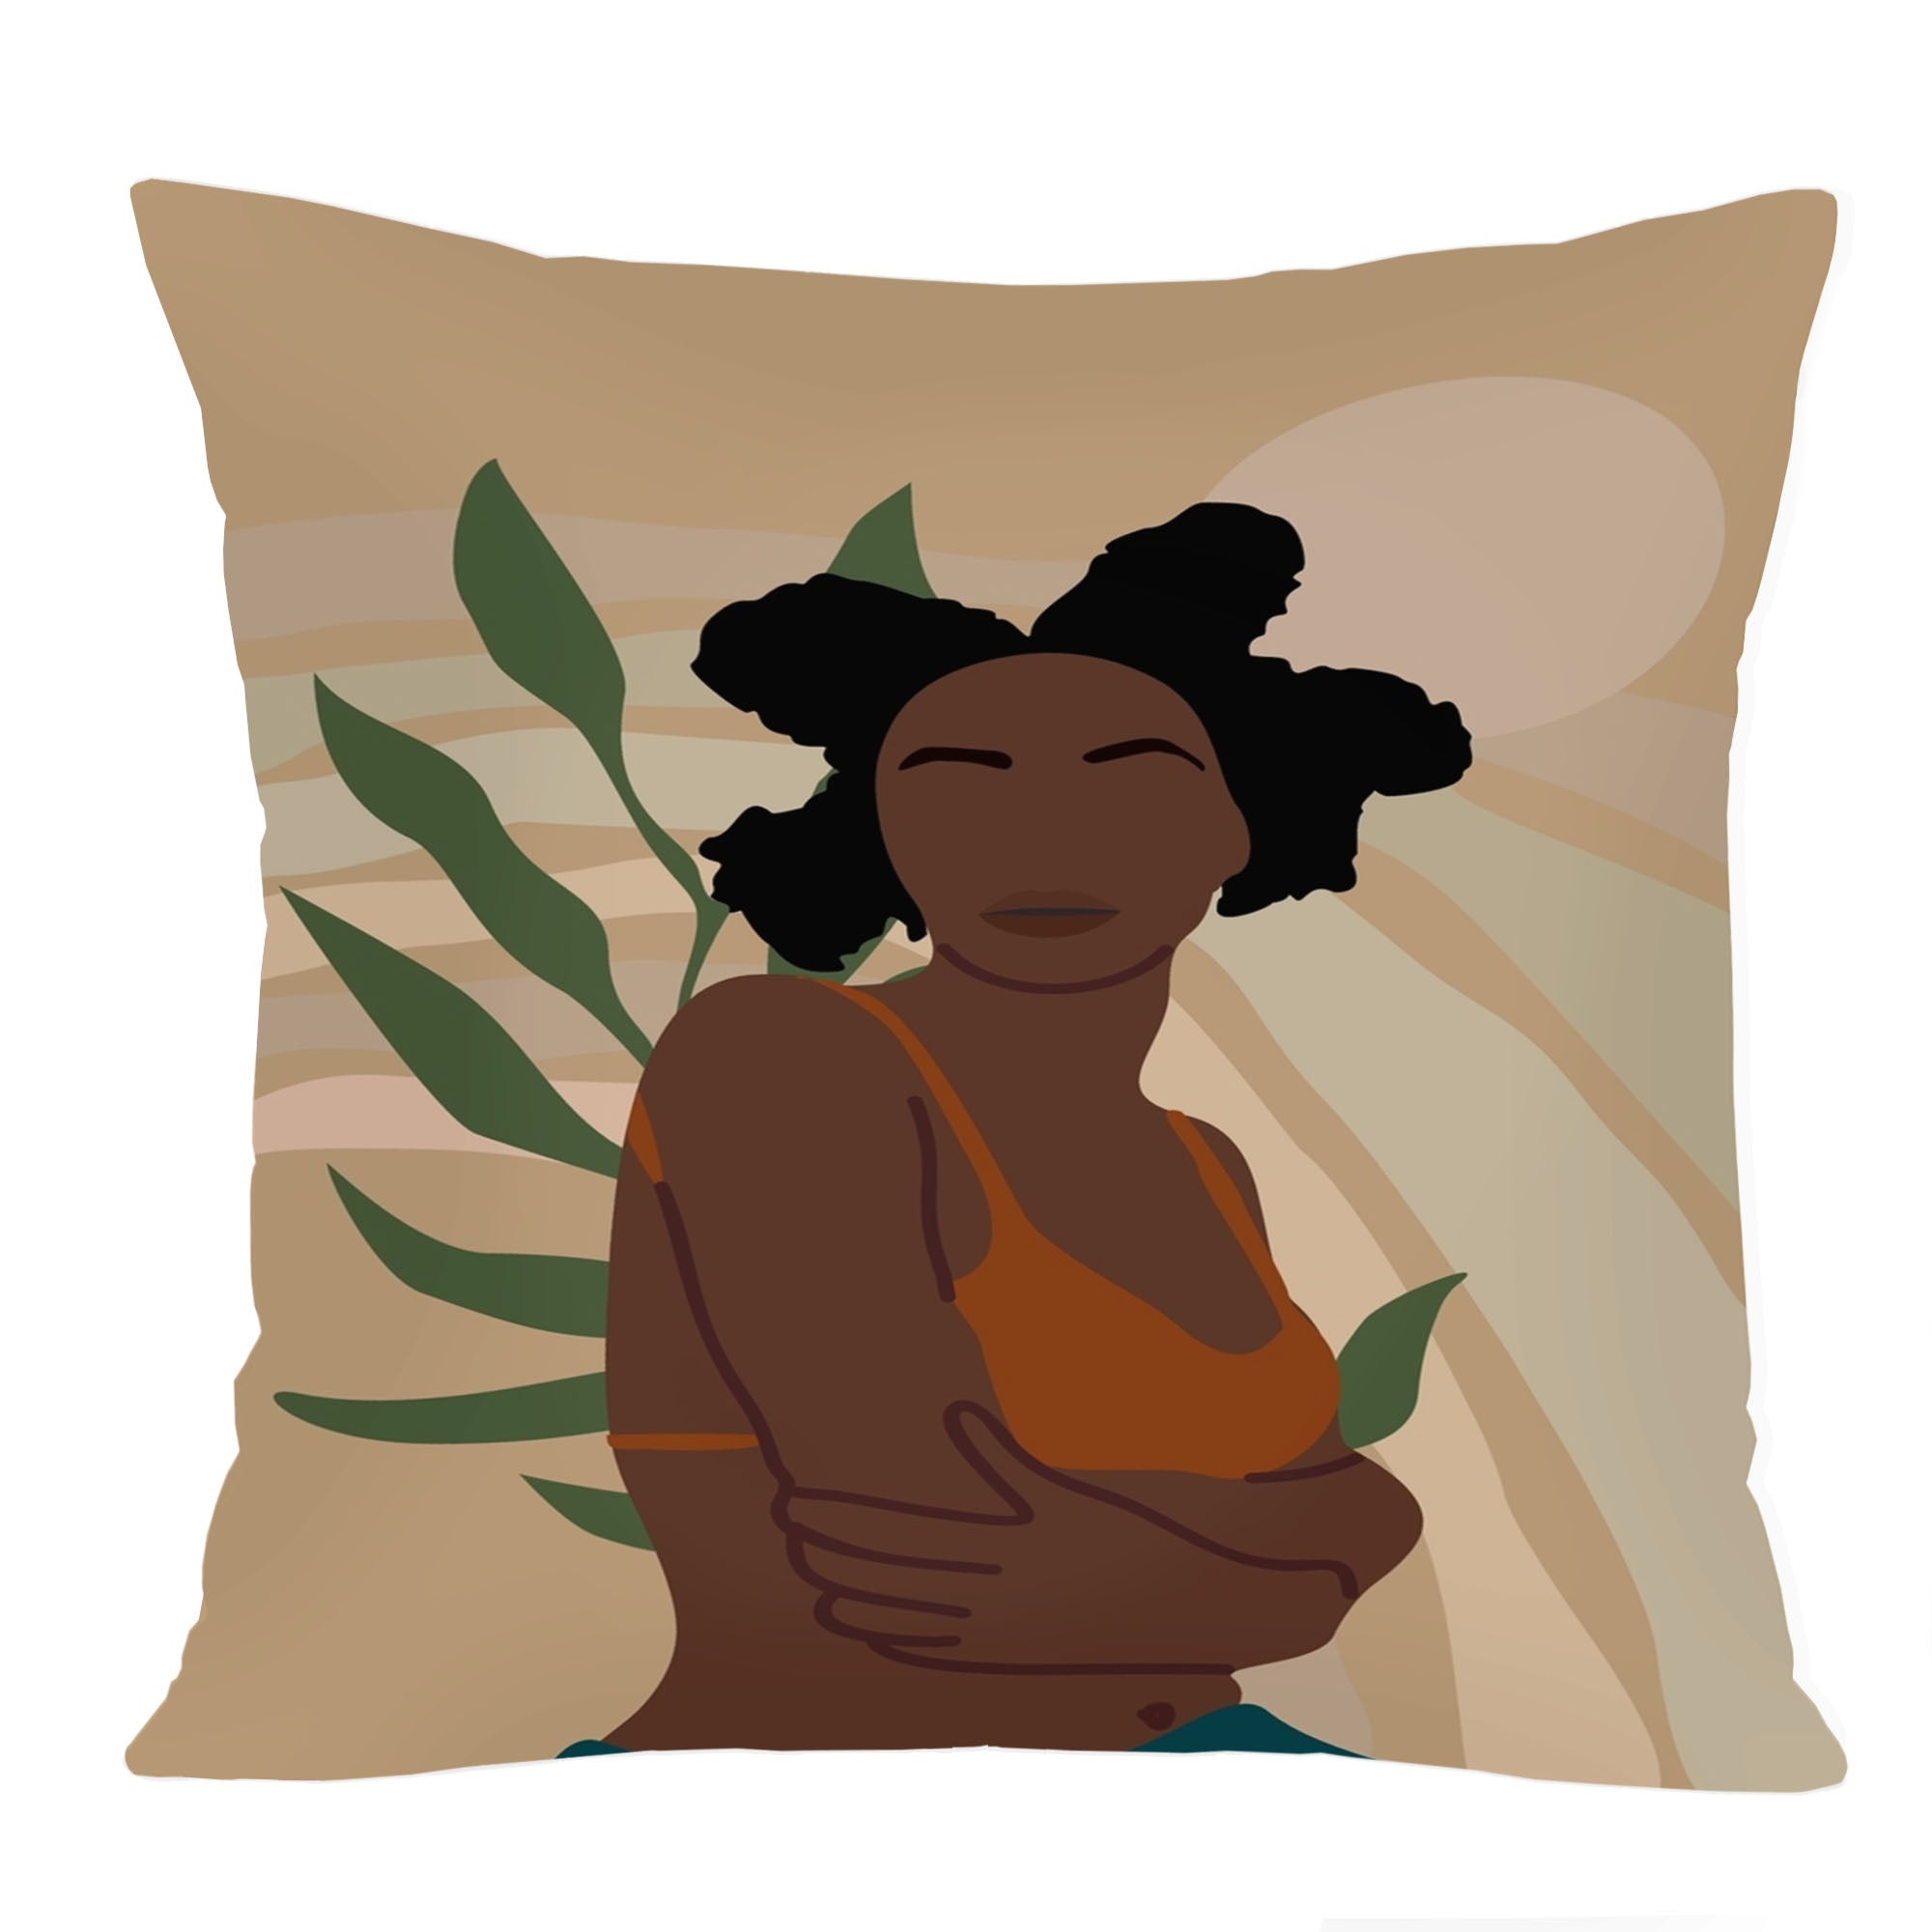 Ethan Taylor People & Portraits Throw Pillow Soft Cushion Cover African American Women Divinely Made Portraits Female Bohemian Decorative Square Accent Pillow Case, 18x18 Inches, Blue, Green - image 1 of 5